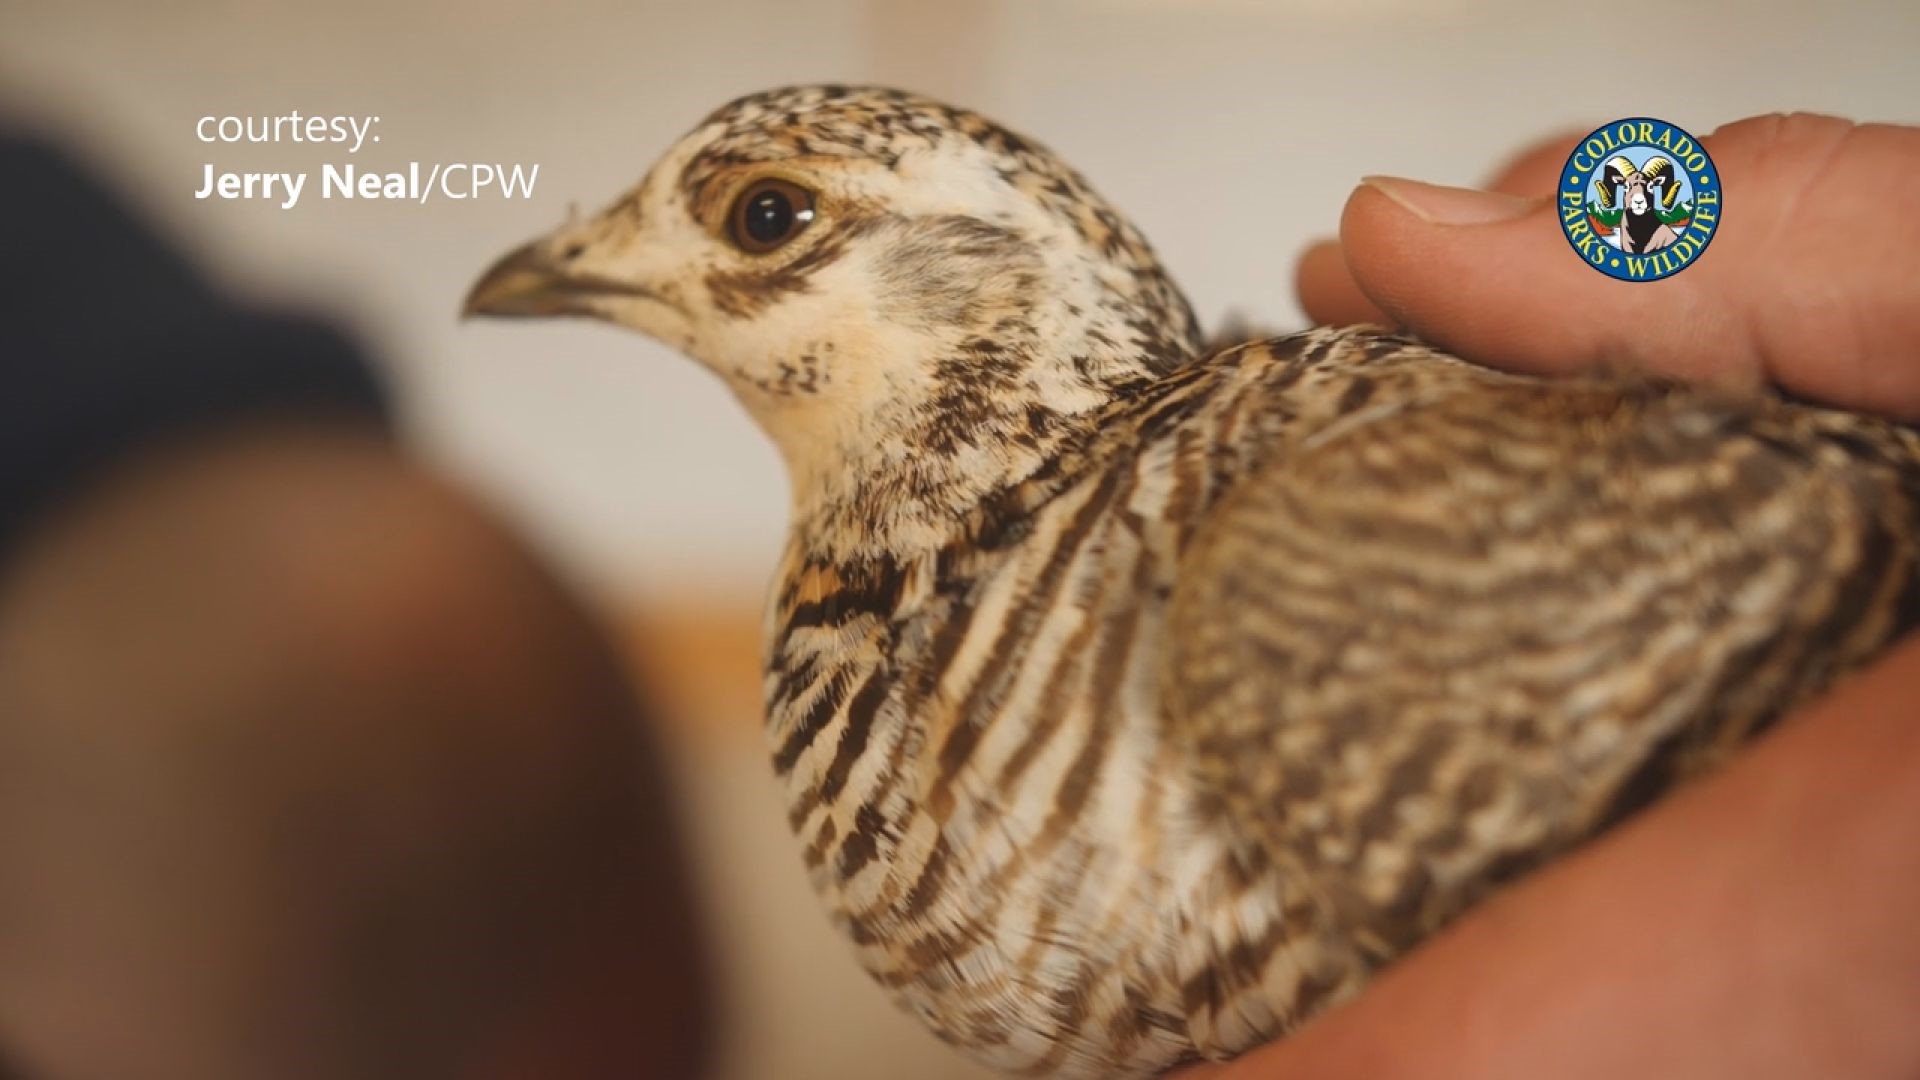 Video provided by Colorado Parks and Wildlife shows various aspects of the process to relocate the Lesser Prairie Chickens from Kansas to Colorado.